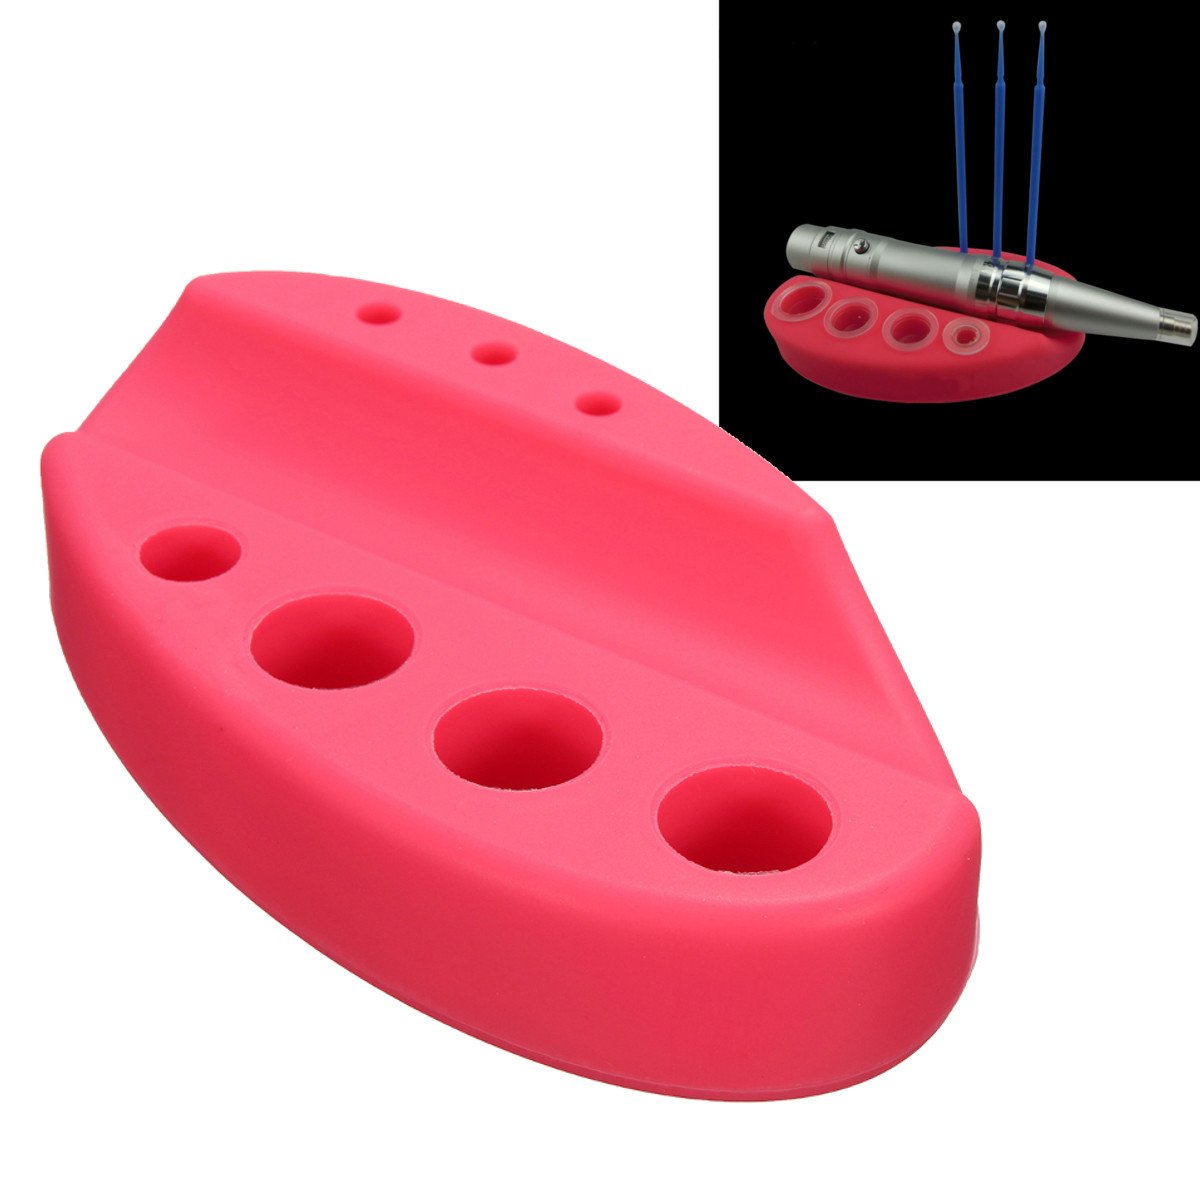 Oval Silicone Tattoo Tool Pen Holder Stand For Microblading Pigment Ink Cup Machine Permanent Makeup Tattoo Accessories